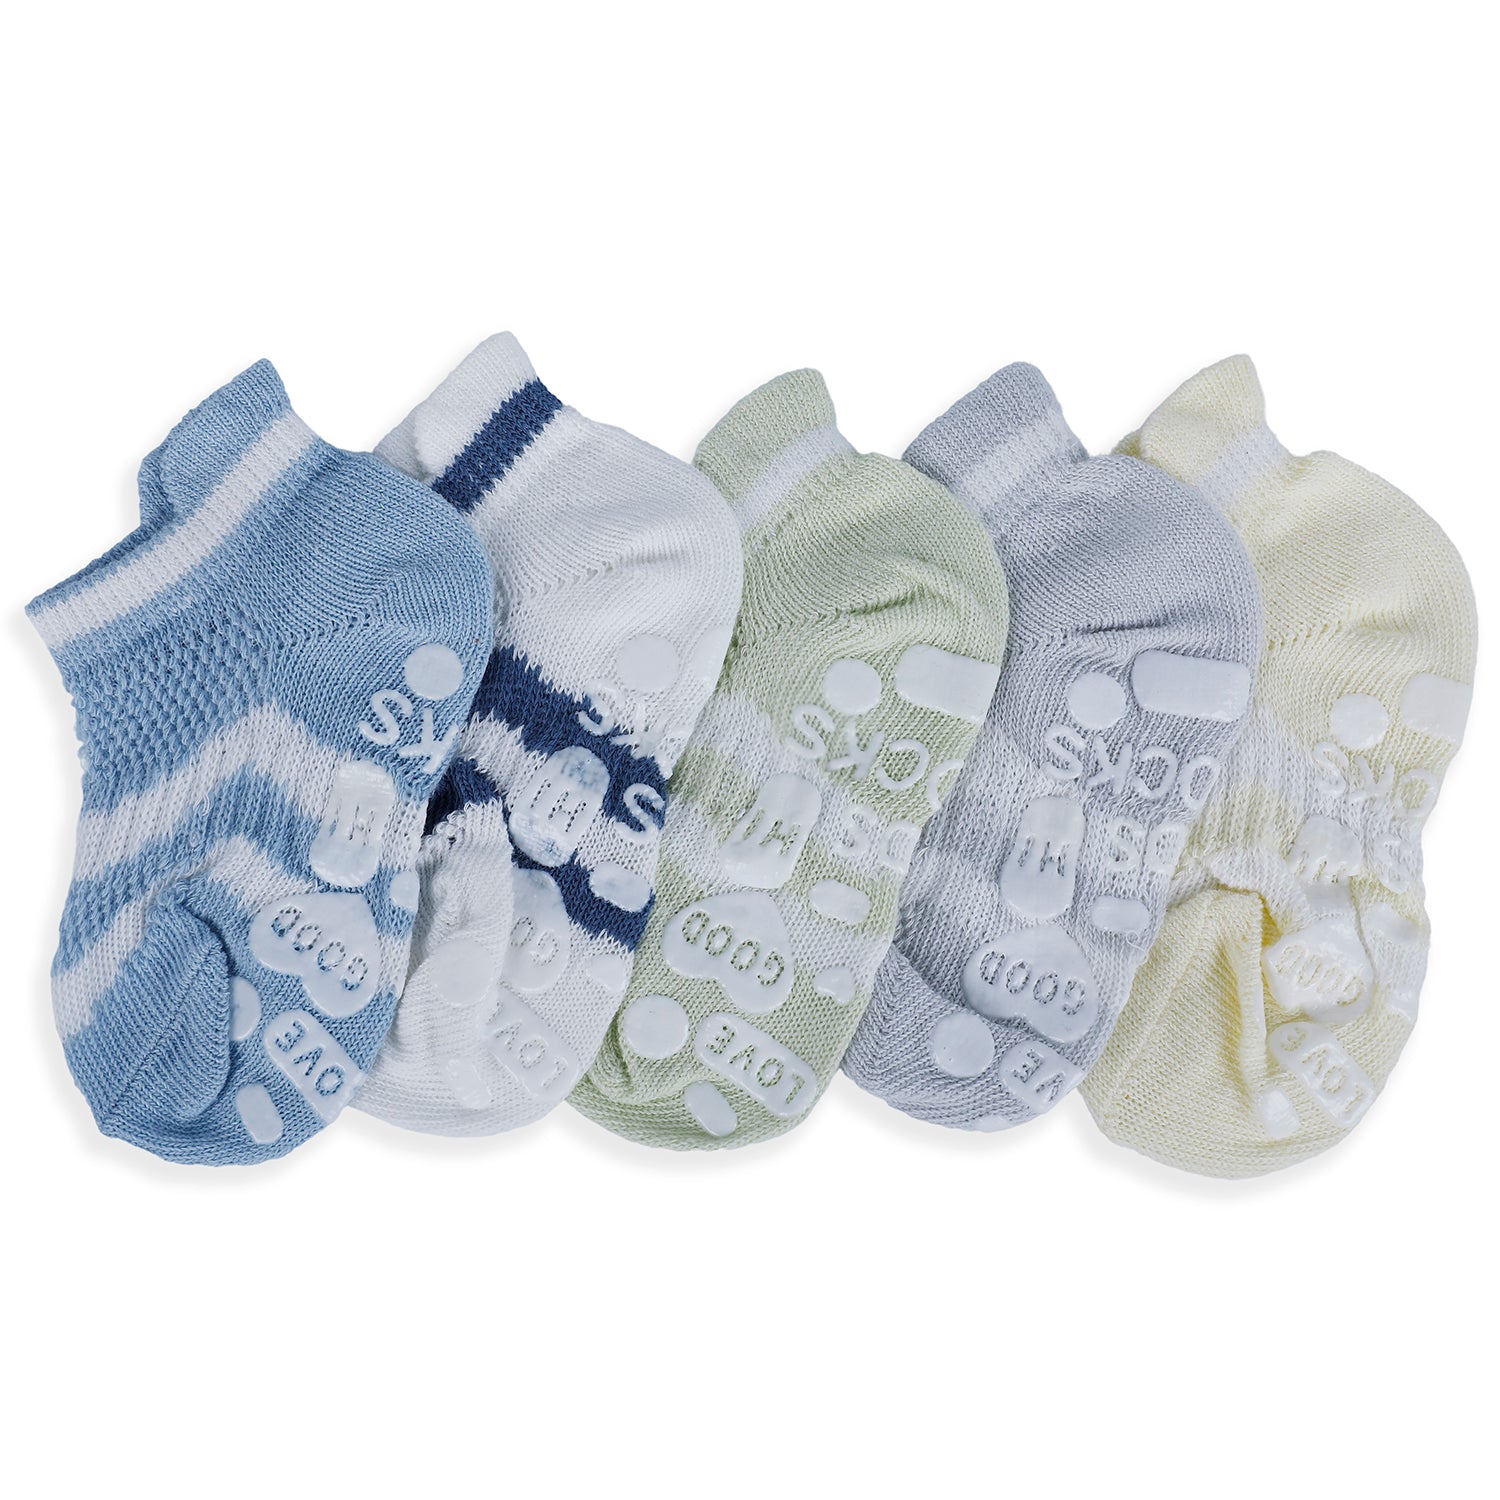 Baby Moo Striped Comfy Anti-Skid Adorable 5 Pack Socks - Multicolour - Baby Moo